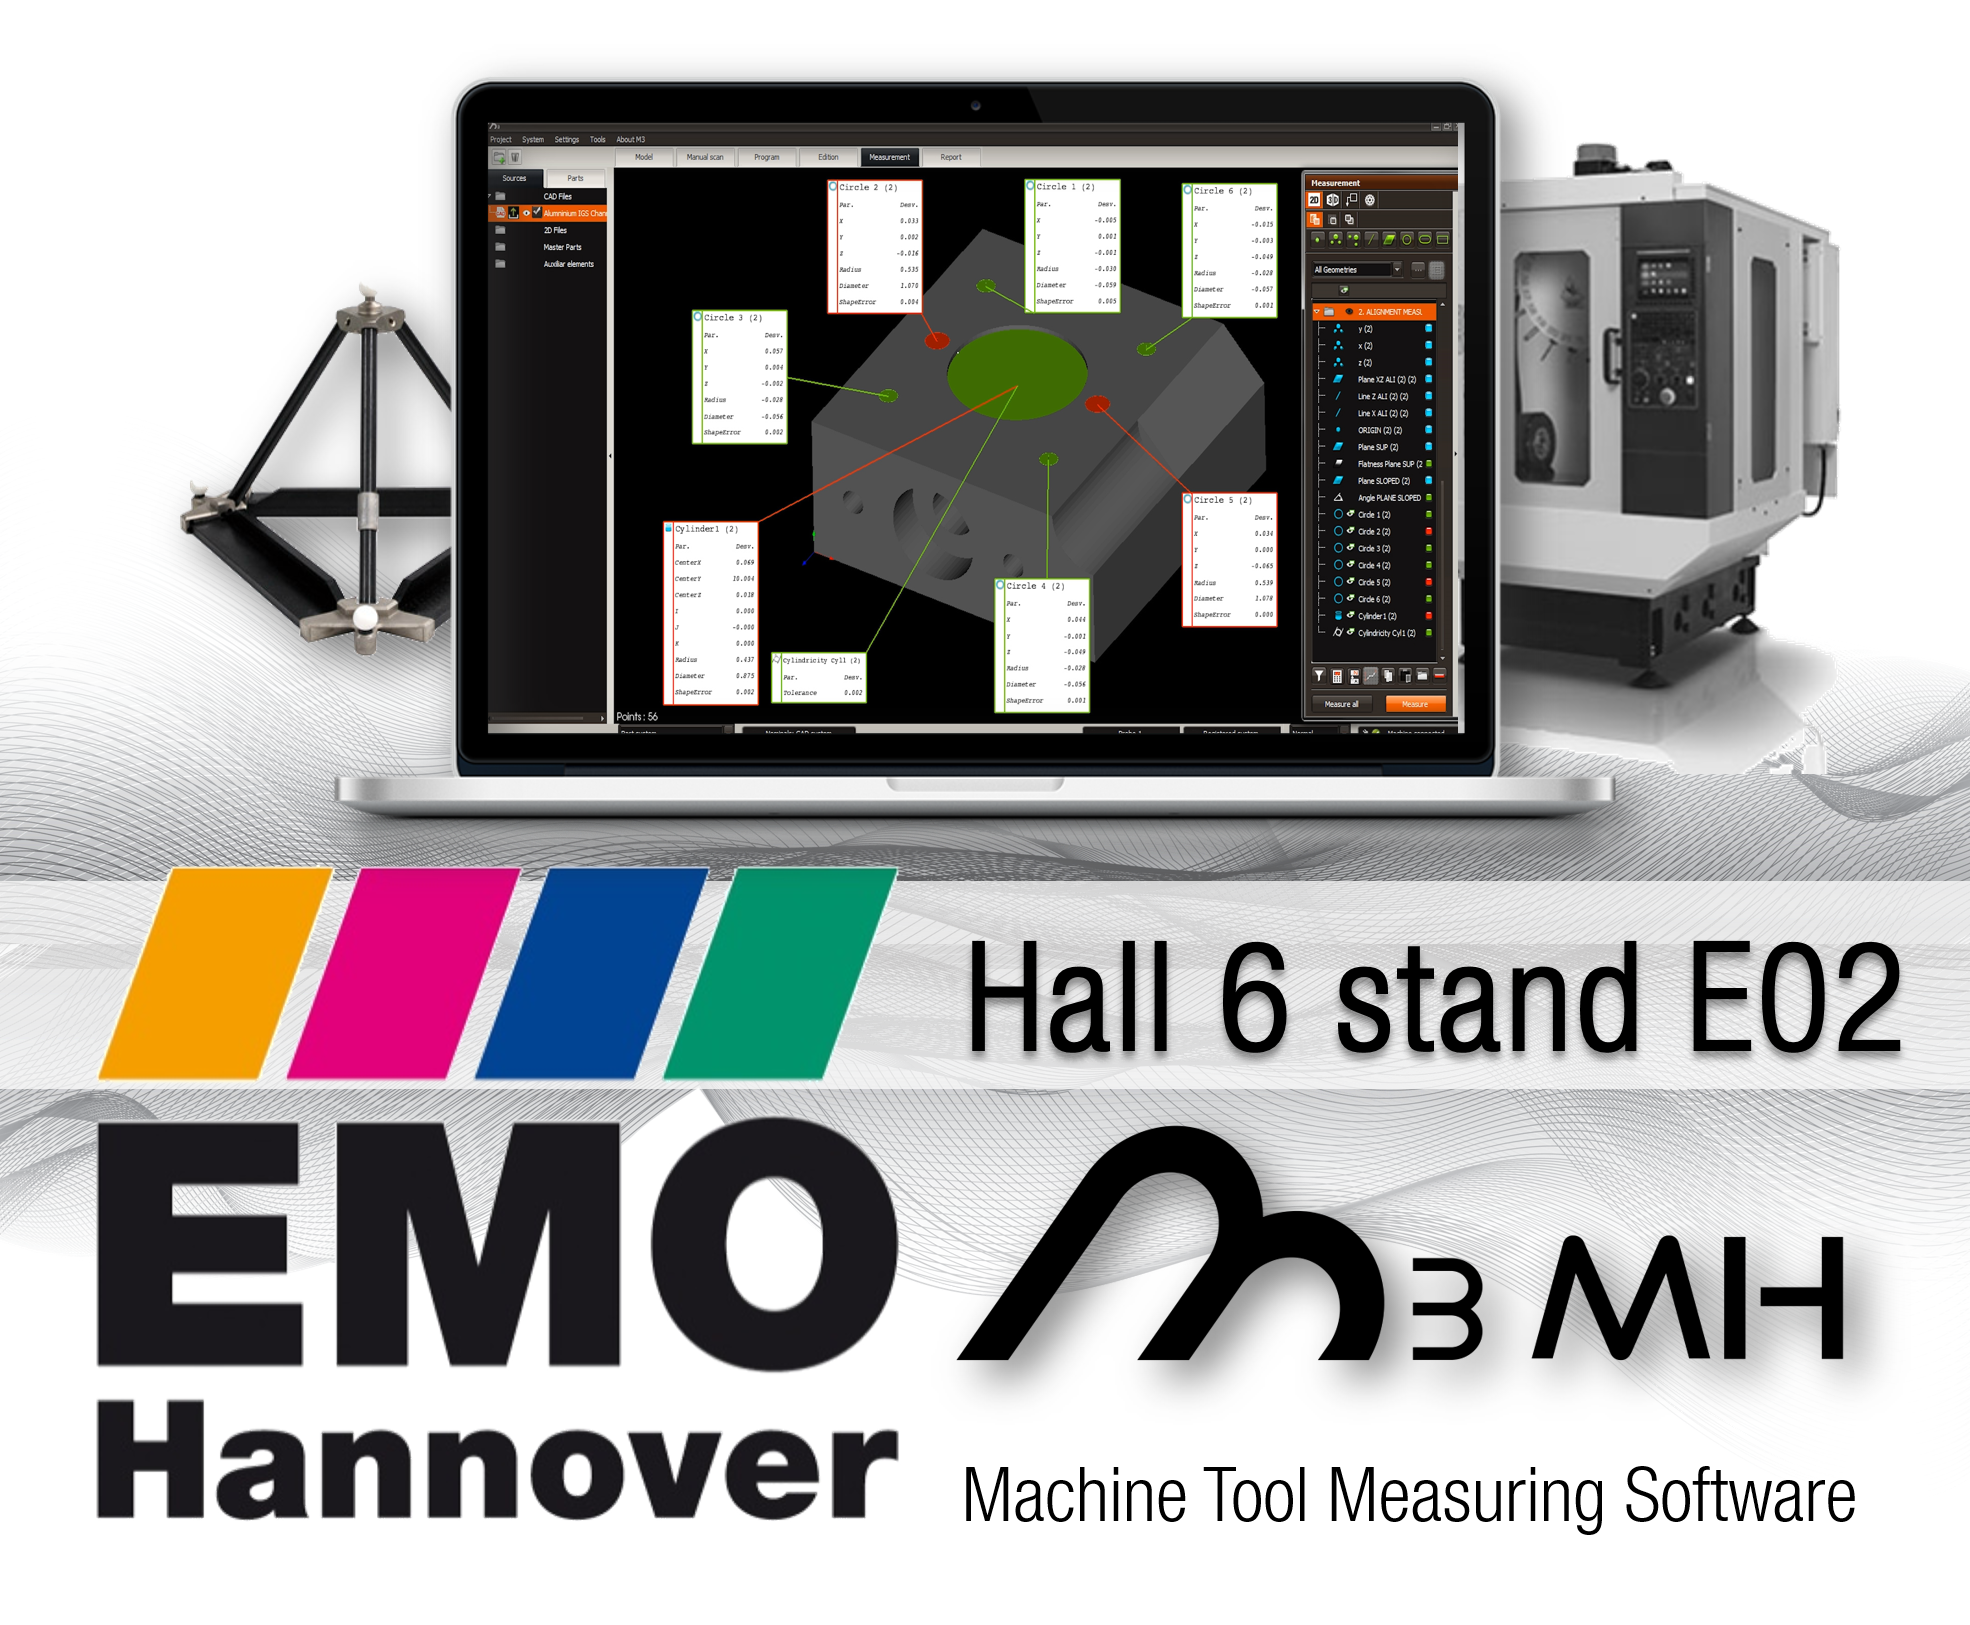 Innovalia Metrology: presents digital metrology solutions (Hall 6 stand E02) to make the leap to automation